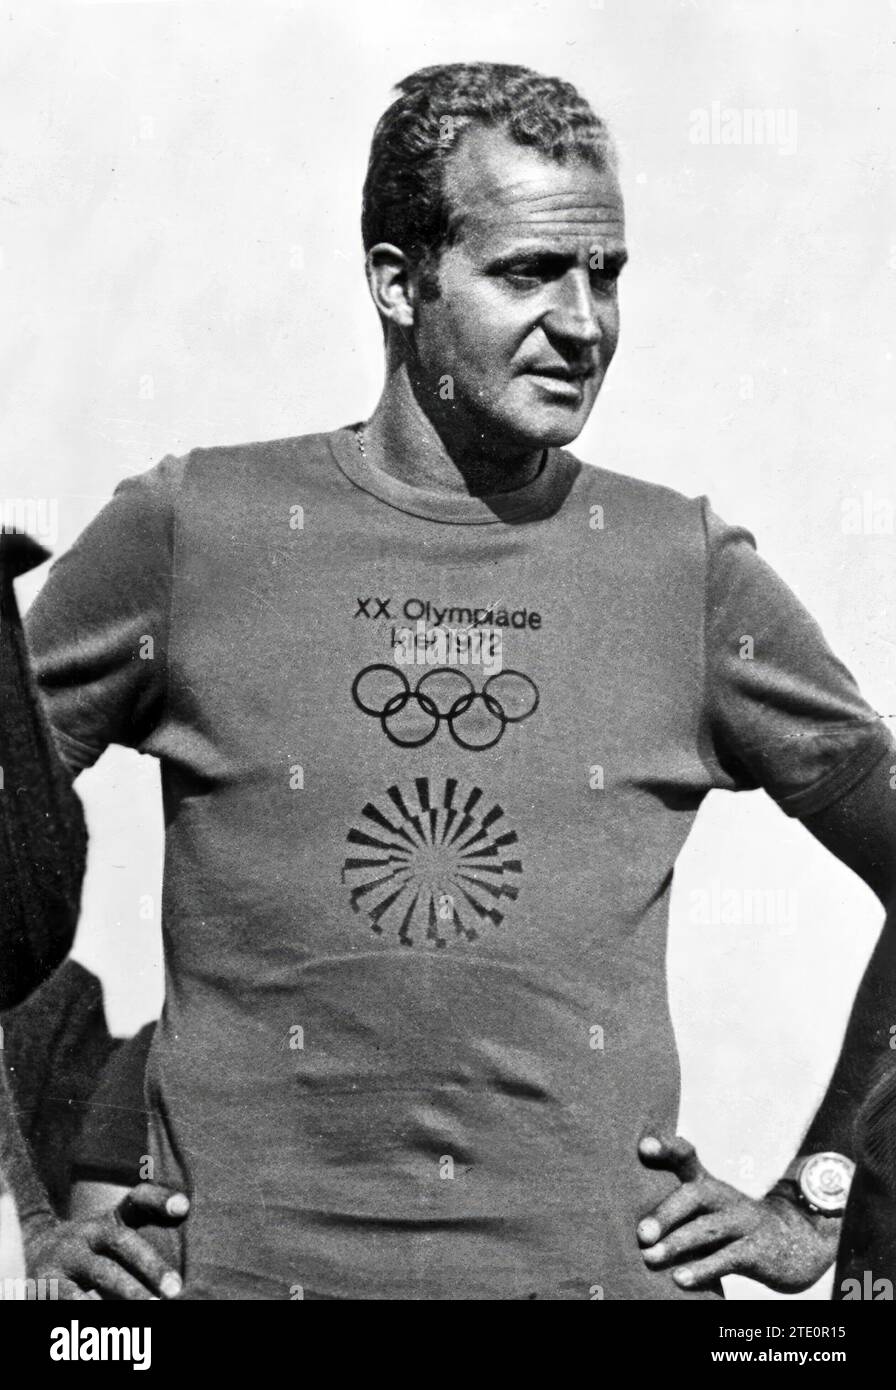 King Juan Carlos I participates in the 1972 Munich Olympics in the sailing competition held in Kiel. Approximate date. Credit: Album / Archivo ABC Stock Photo